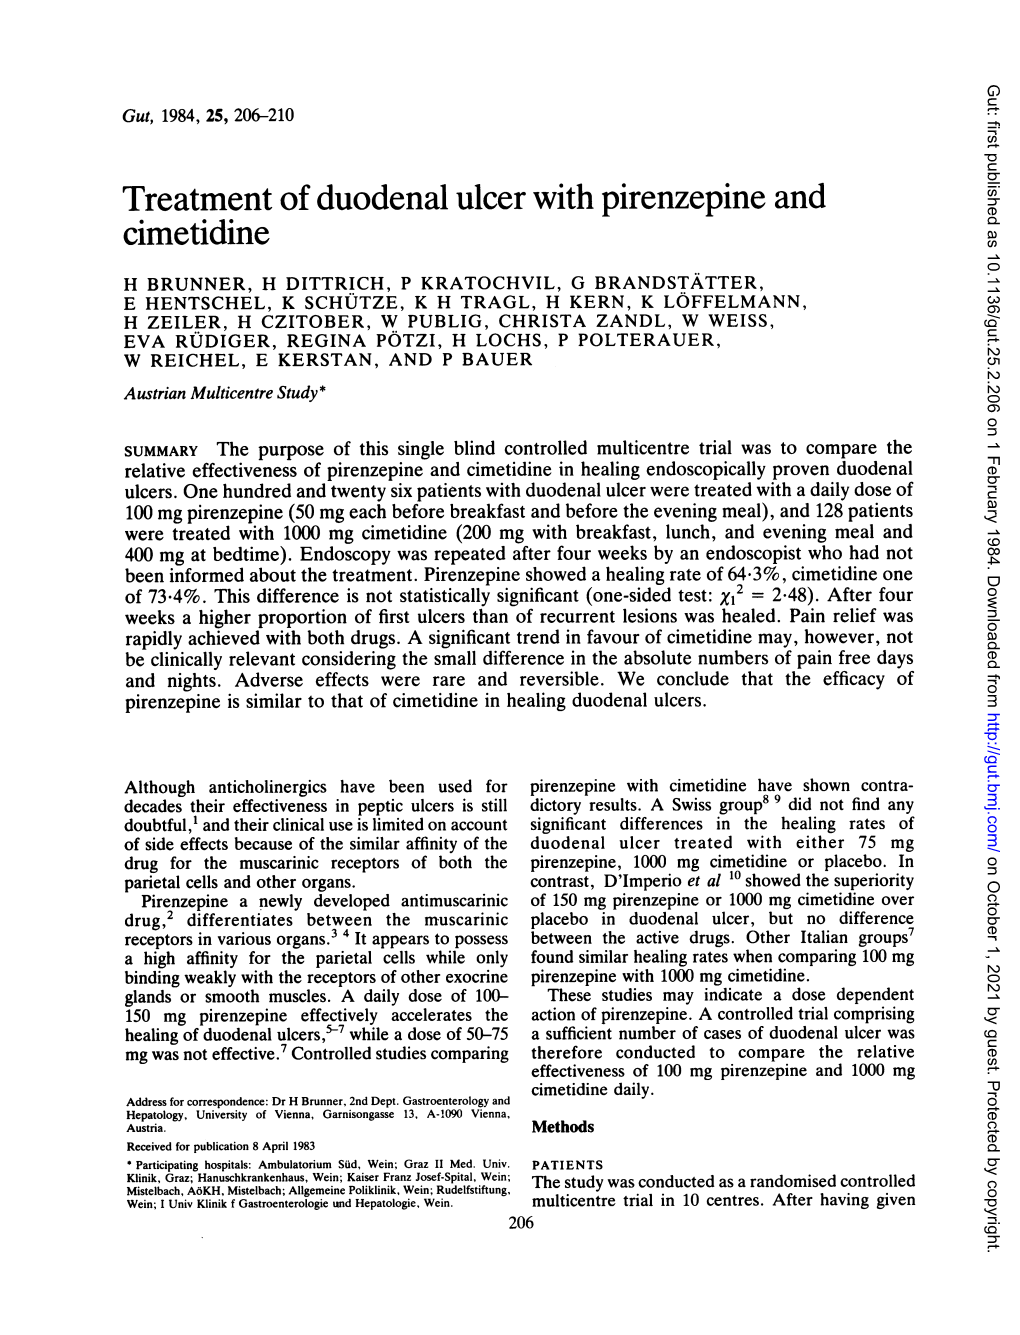 Treatment of Duodenal Ulcer with Pirenzepine and Cimetidine